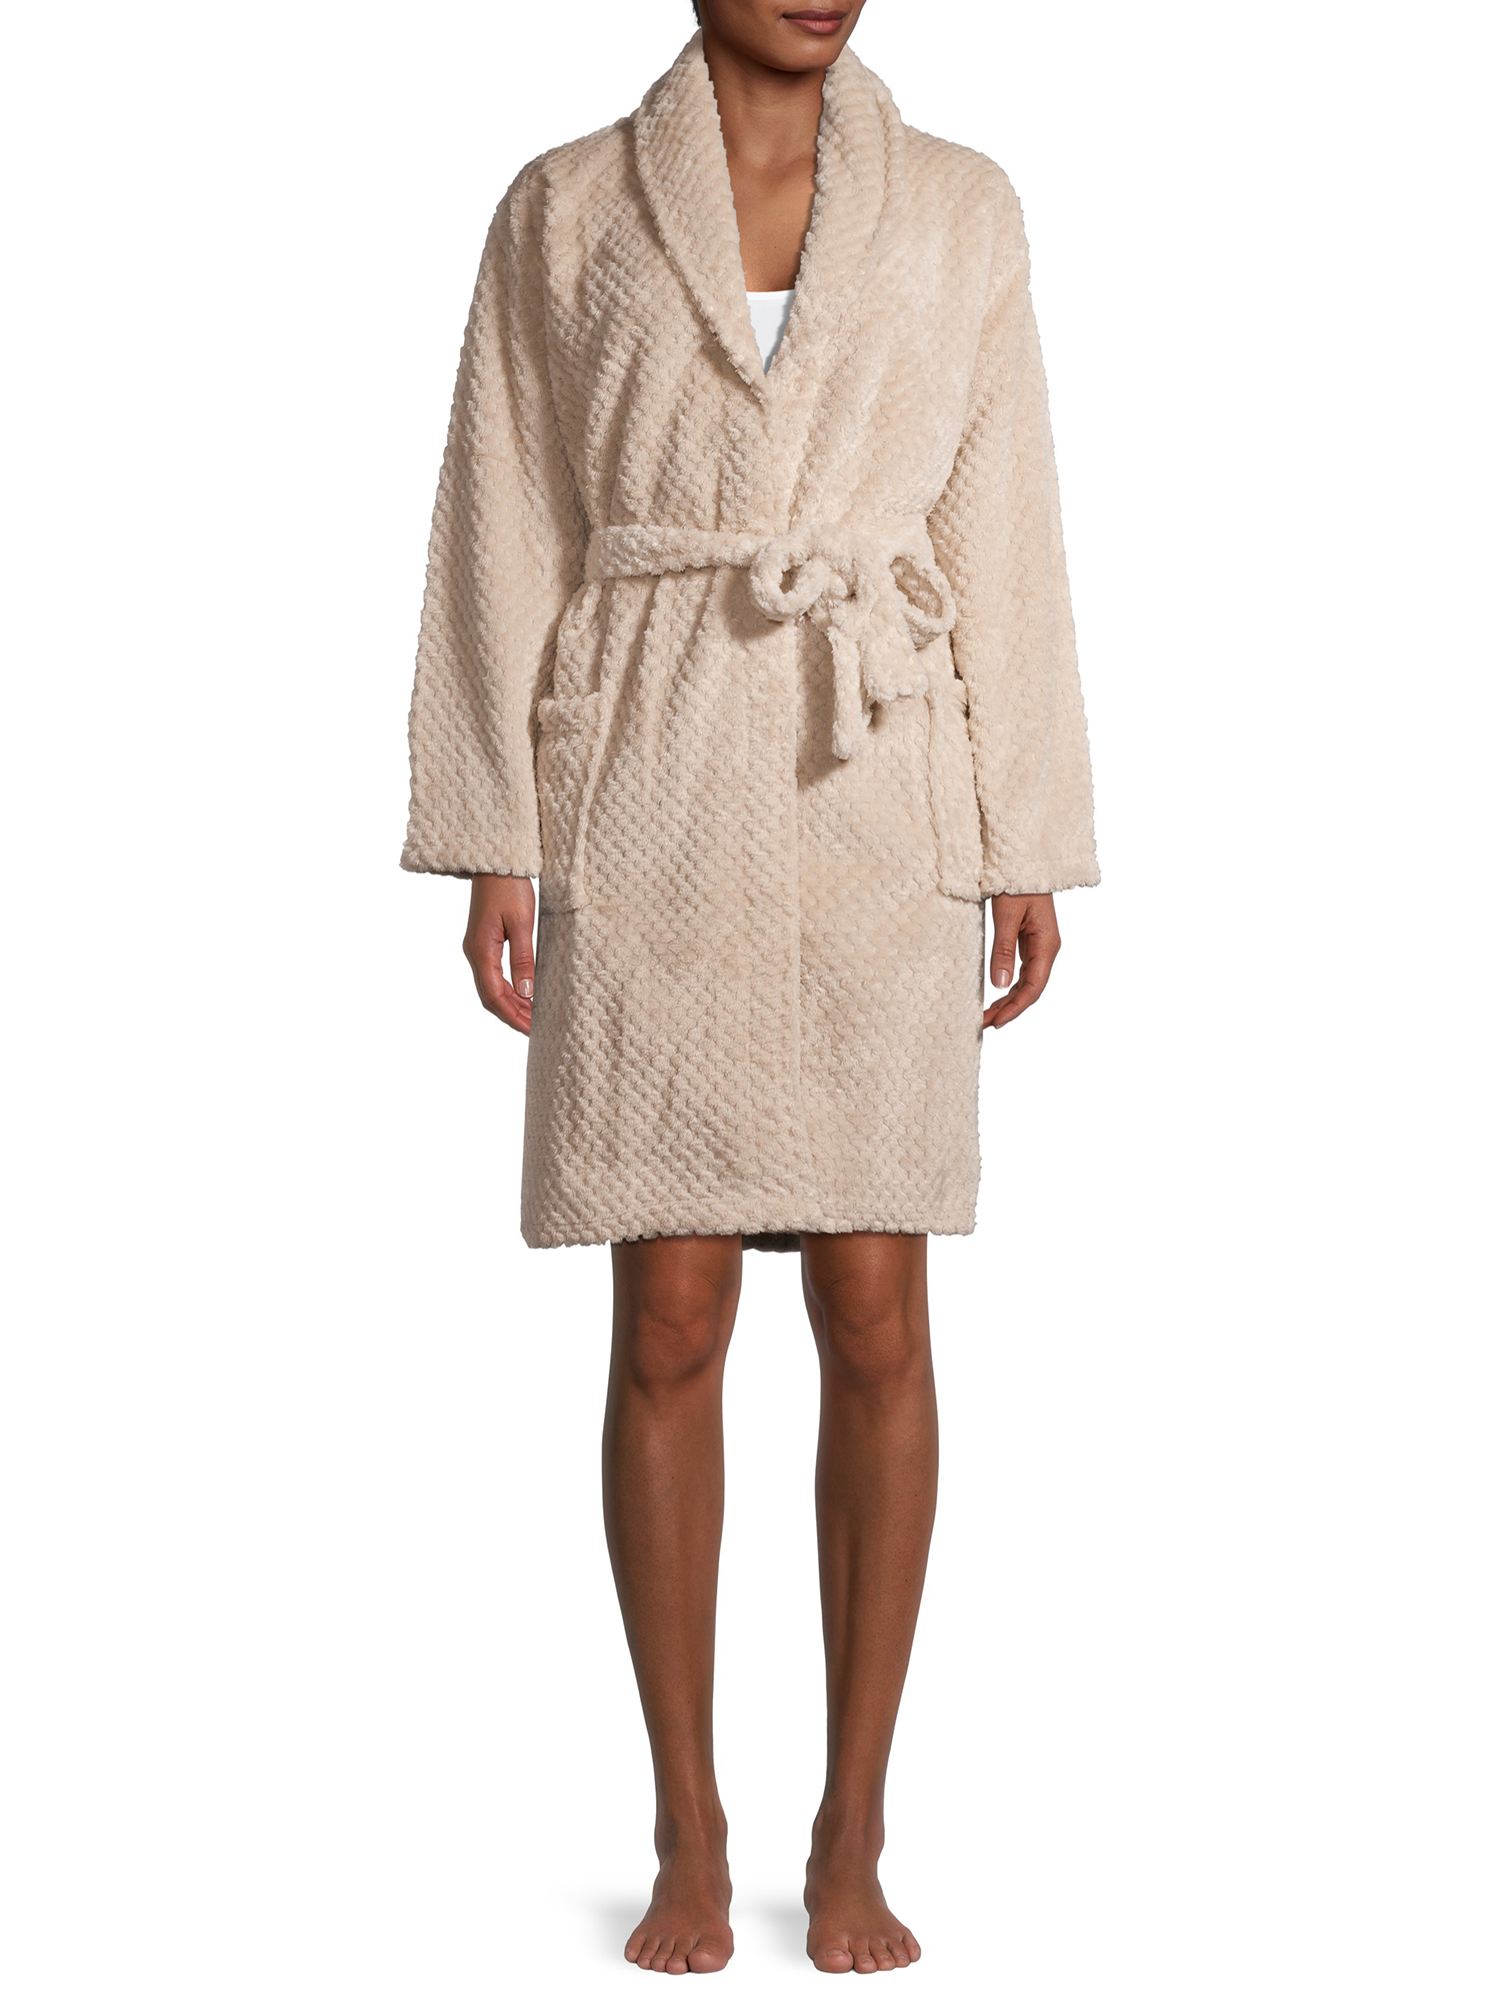 The Cozy Corner Club Durable Easy Care Textured Evening Robe (Women's), 1 Pack - image 5 of 7